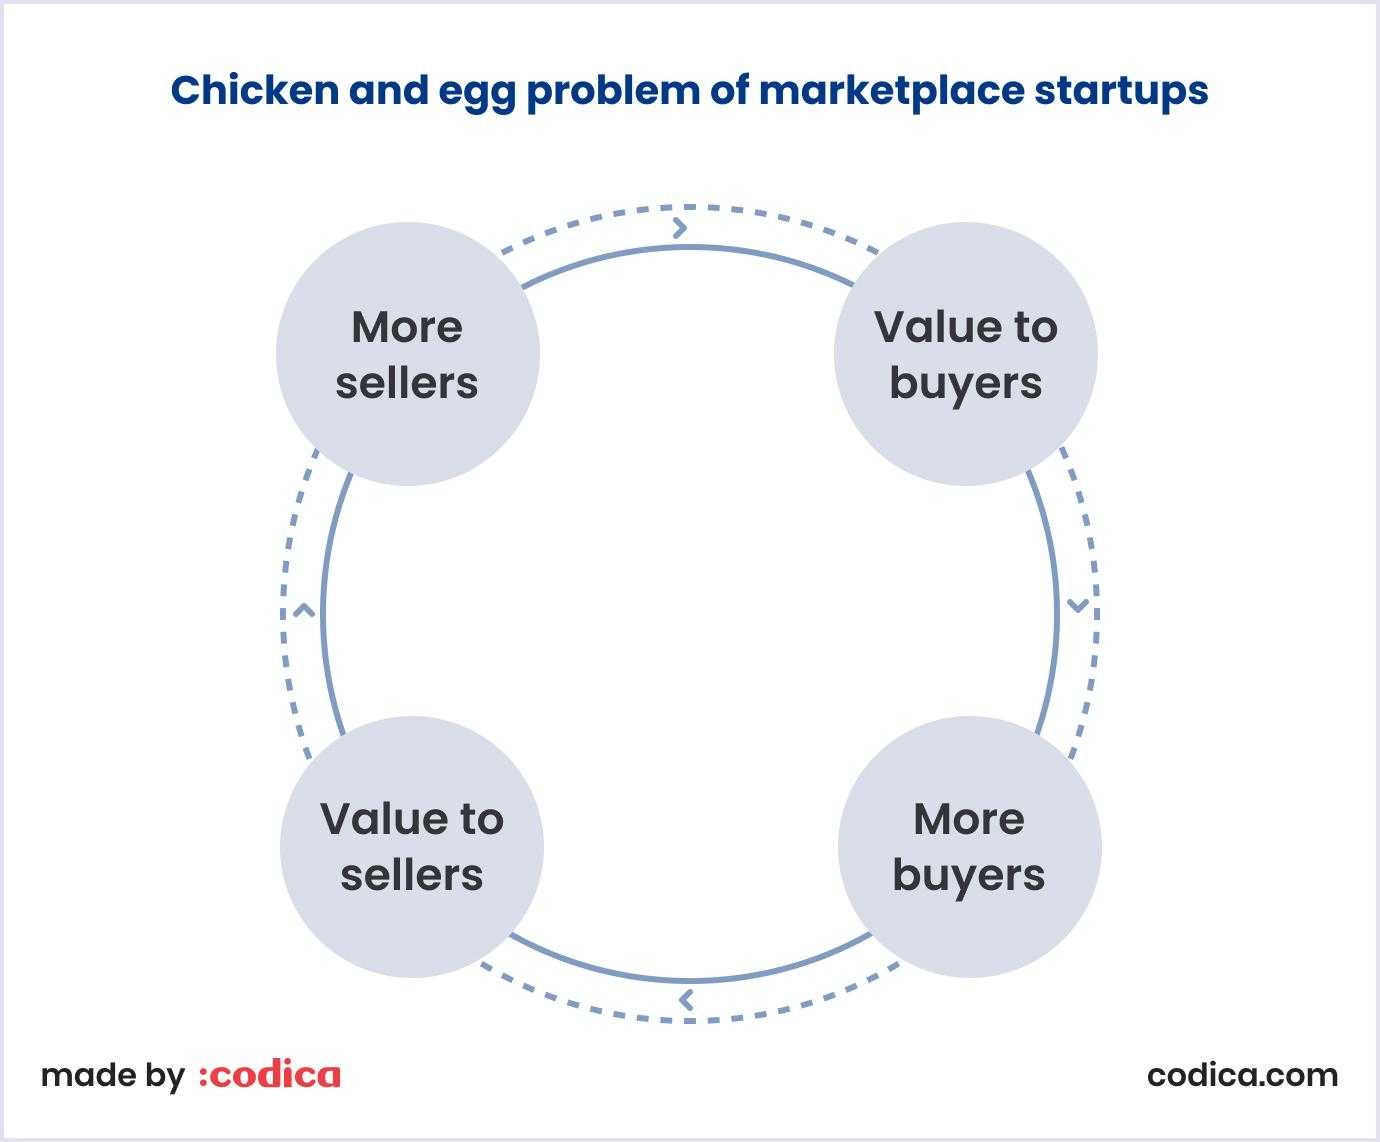 Chicken and egg problem of marketplace startups